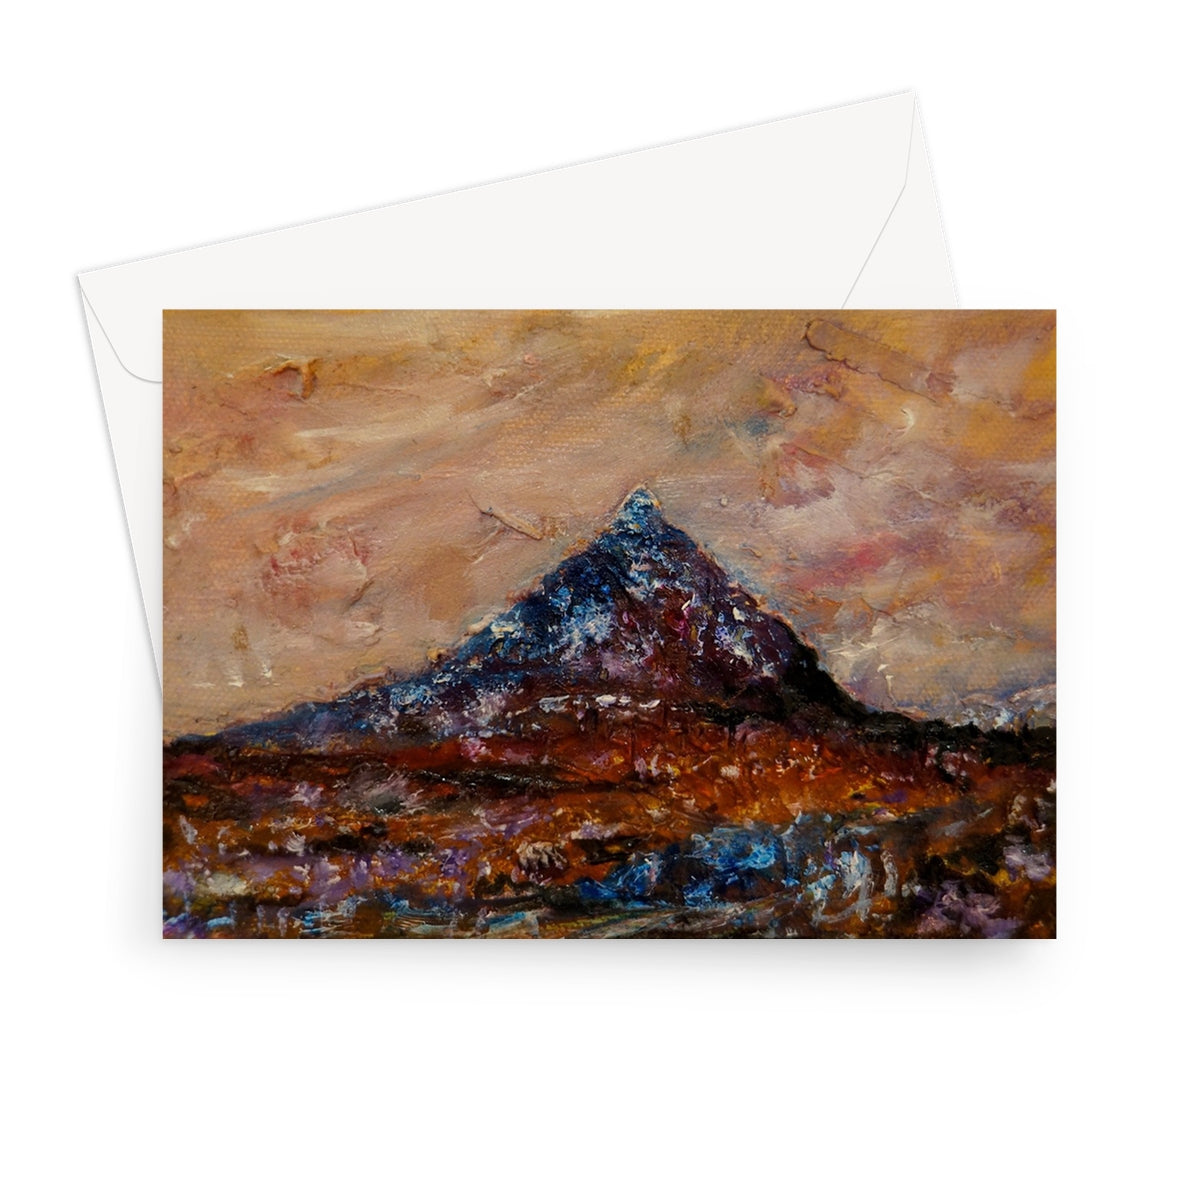 Buachaille Etive Mòr Art Gifts Greeting Card-Greetings Cards-Glencoe Art Gallery-7"x5"-1 Card-Paintings, Prints, Homeware, Art Gifts From Scotland By Scottish Artist Kevin Hunter